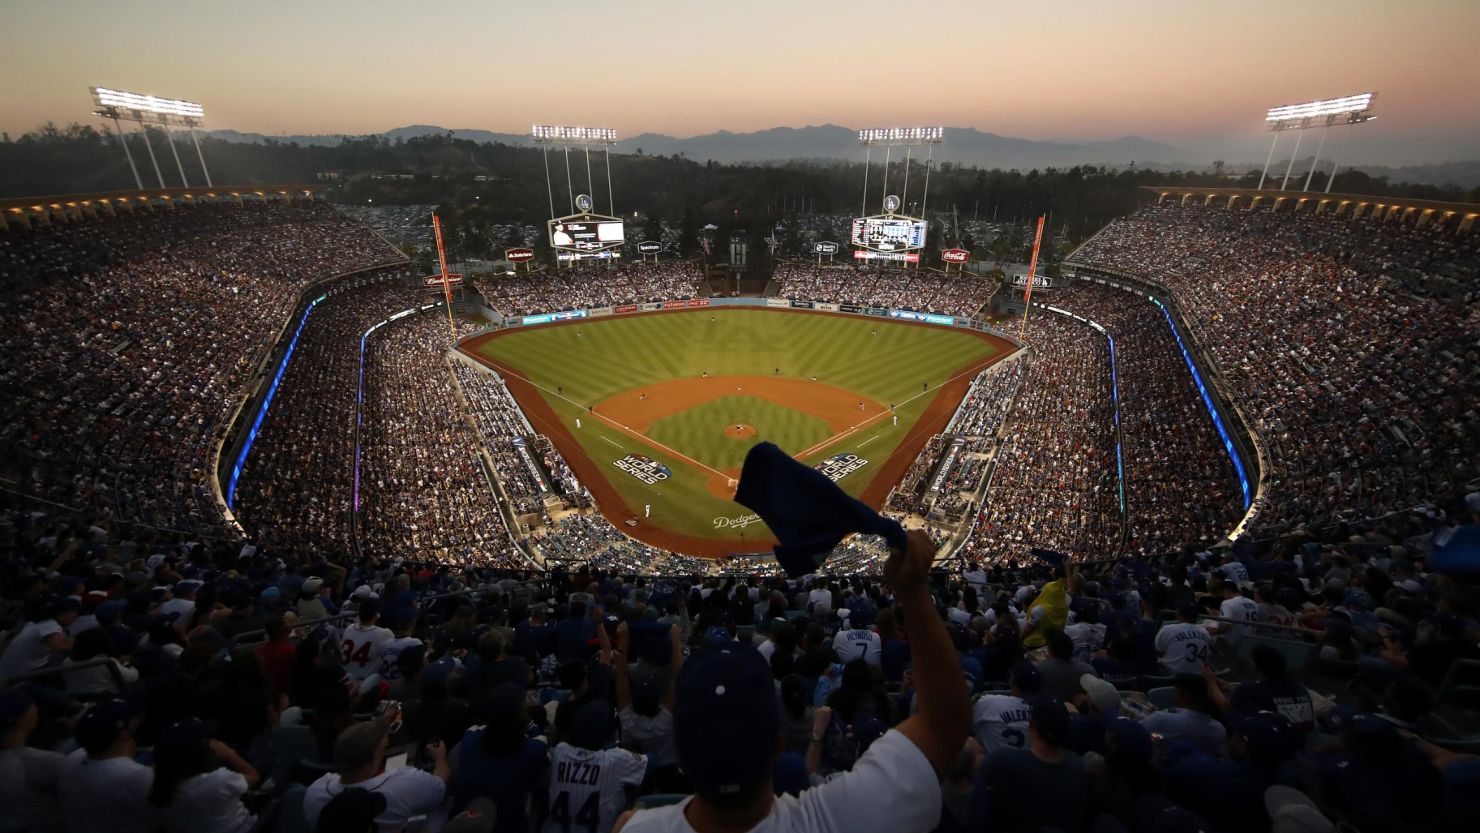 A view of Dodger Stadium at Game 4 of the World Series. Game 5 is Sunday, which helps complete the Los Angeles sports equinox.